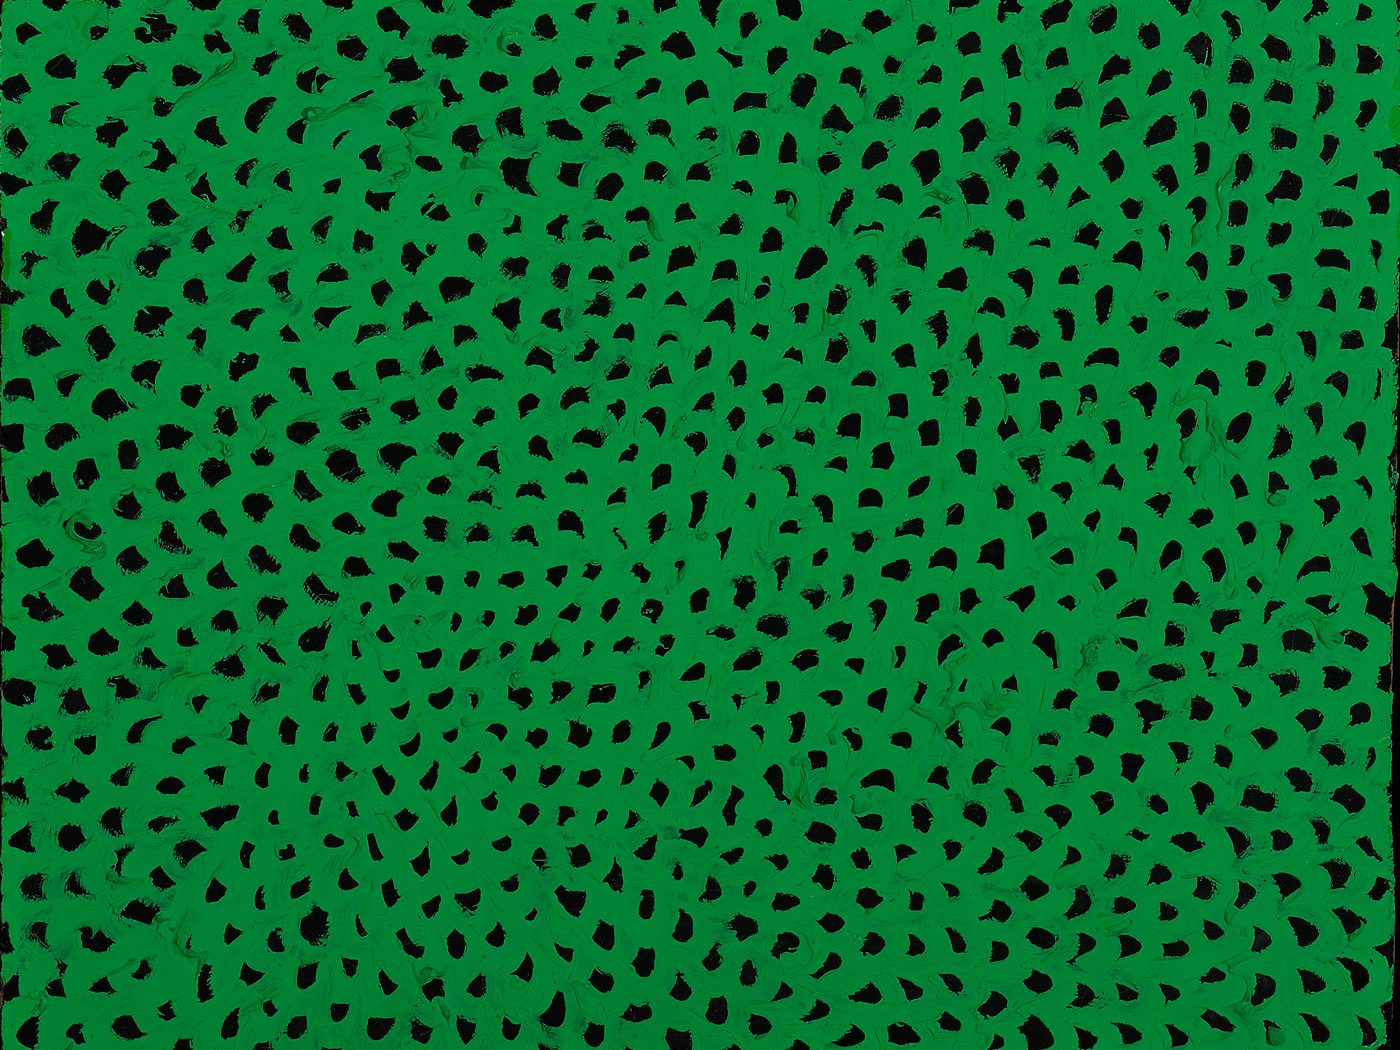 Painting of abstract black and green net by Yayoi Kusama